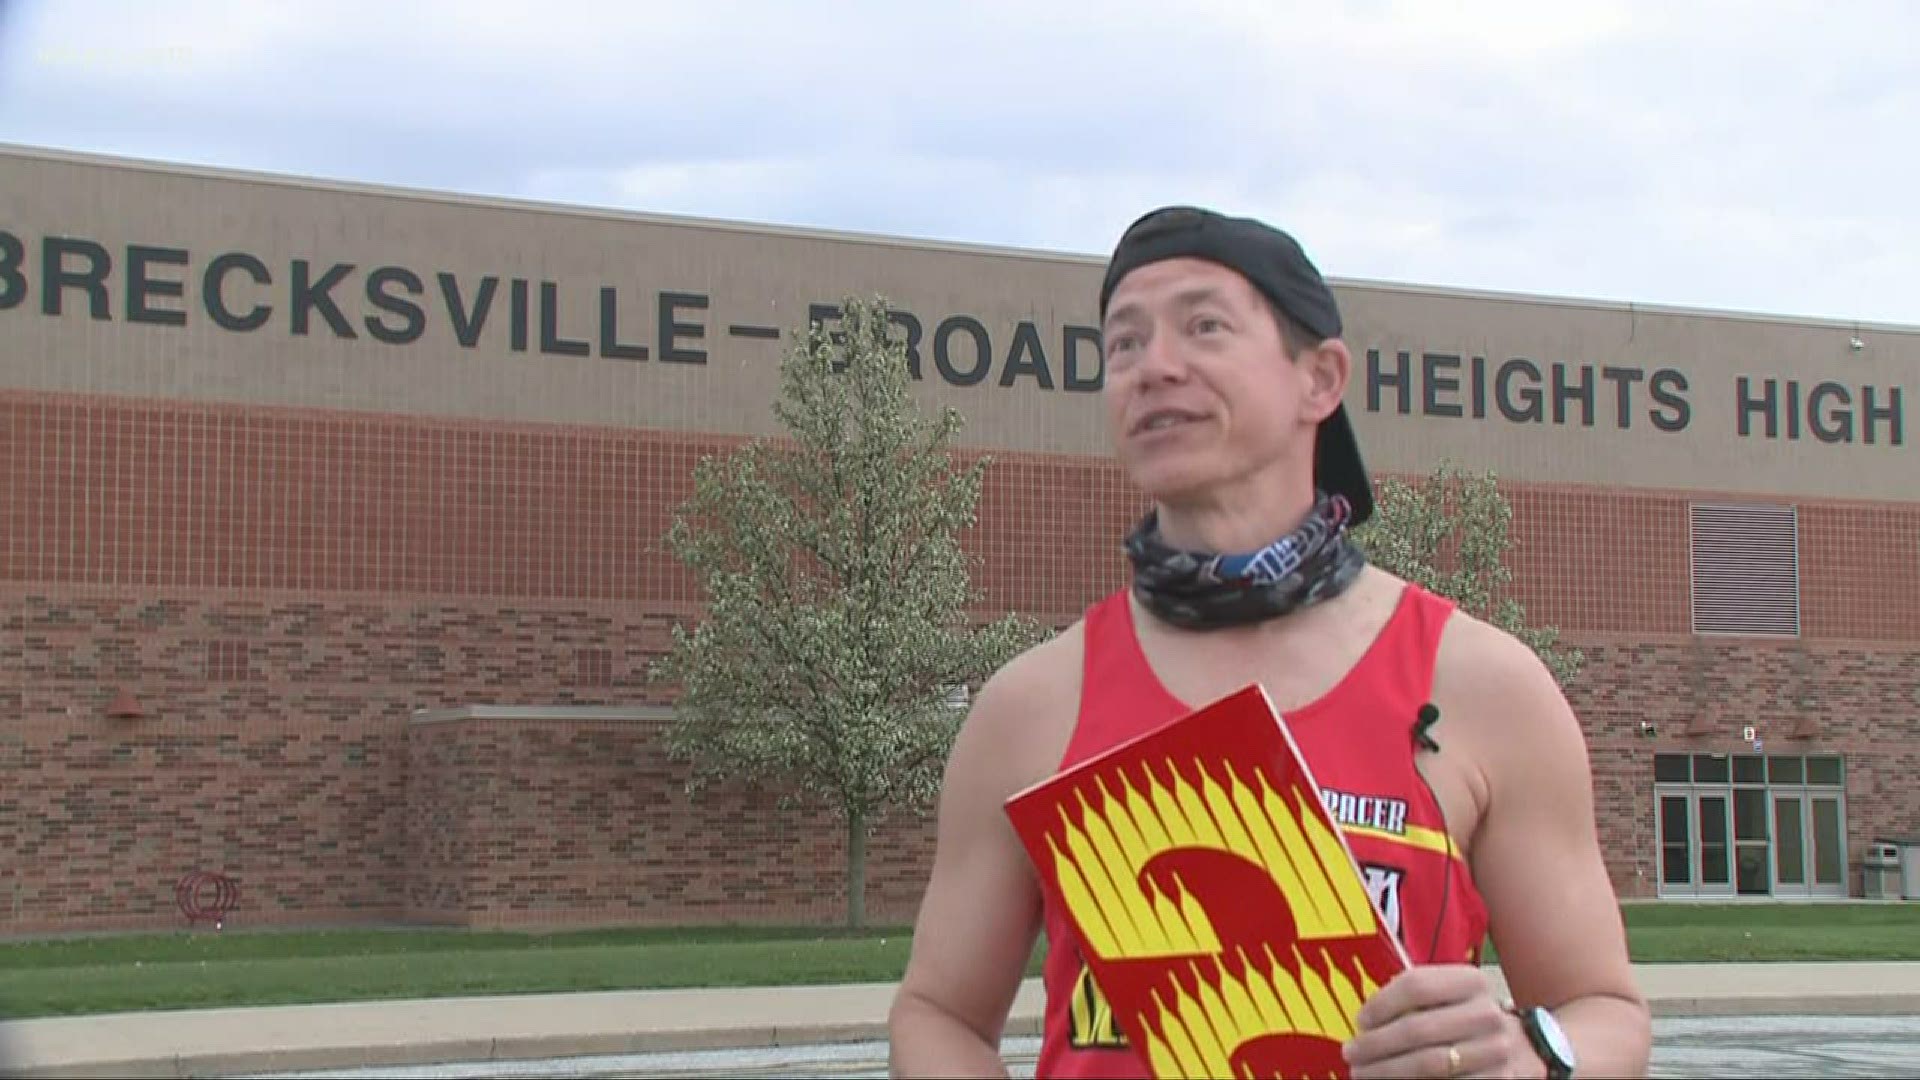 Local teacher uses marathon route to see students he misses. Sean Brennan is a teacher at Brecksville-Broadview Heights high-school.